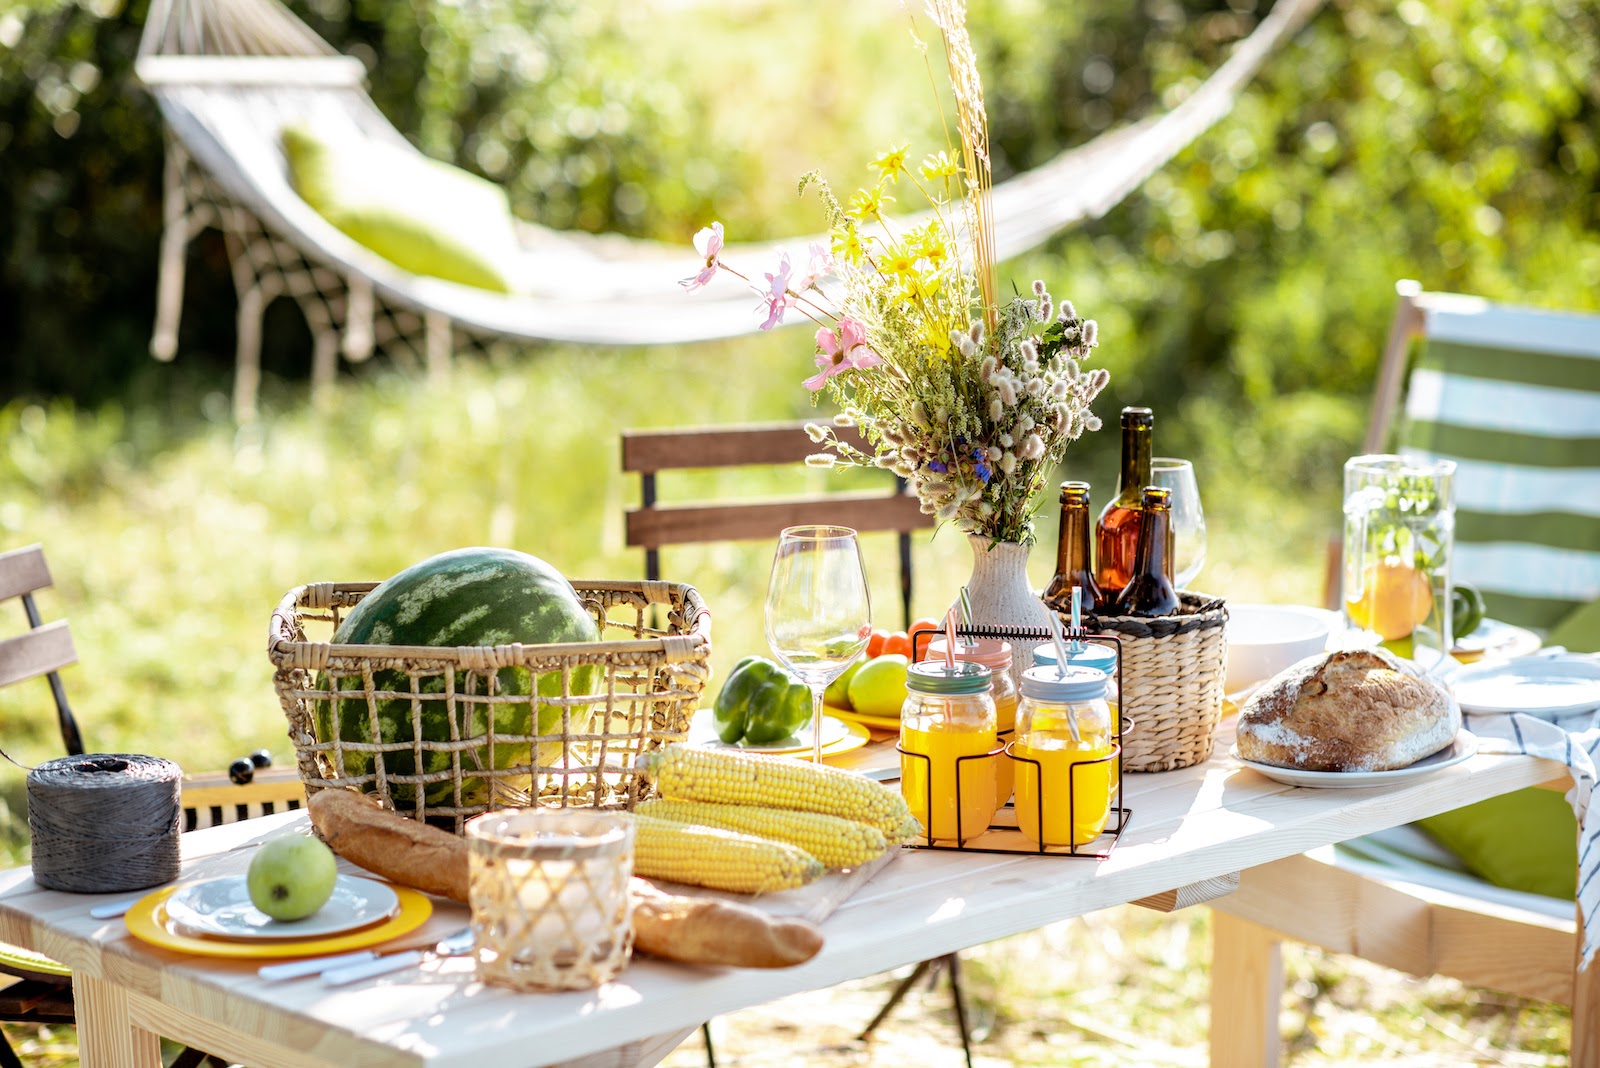 backyard picnic ideas: Setup for a backyard picnic with a hammock in the background